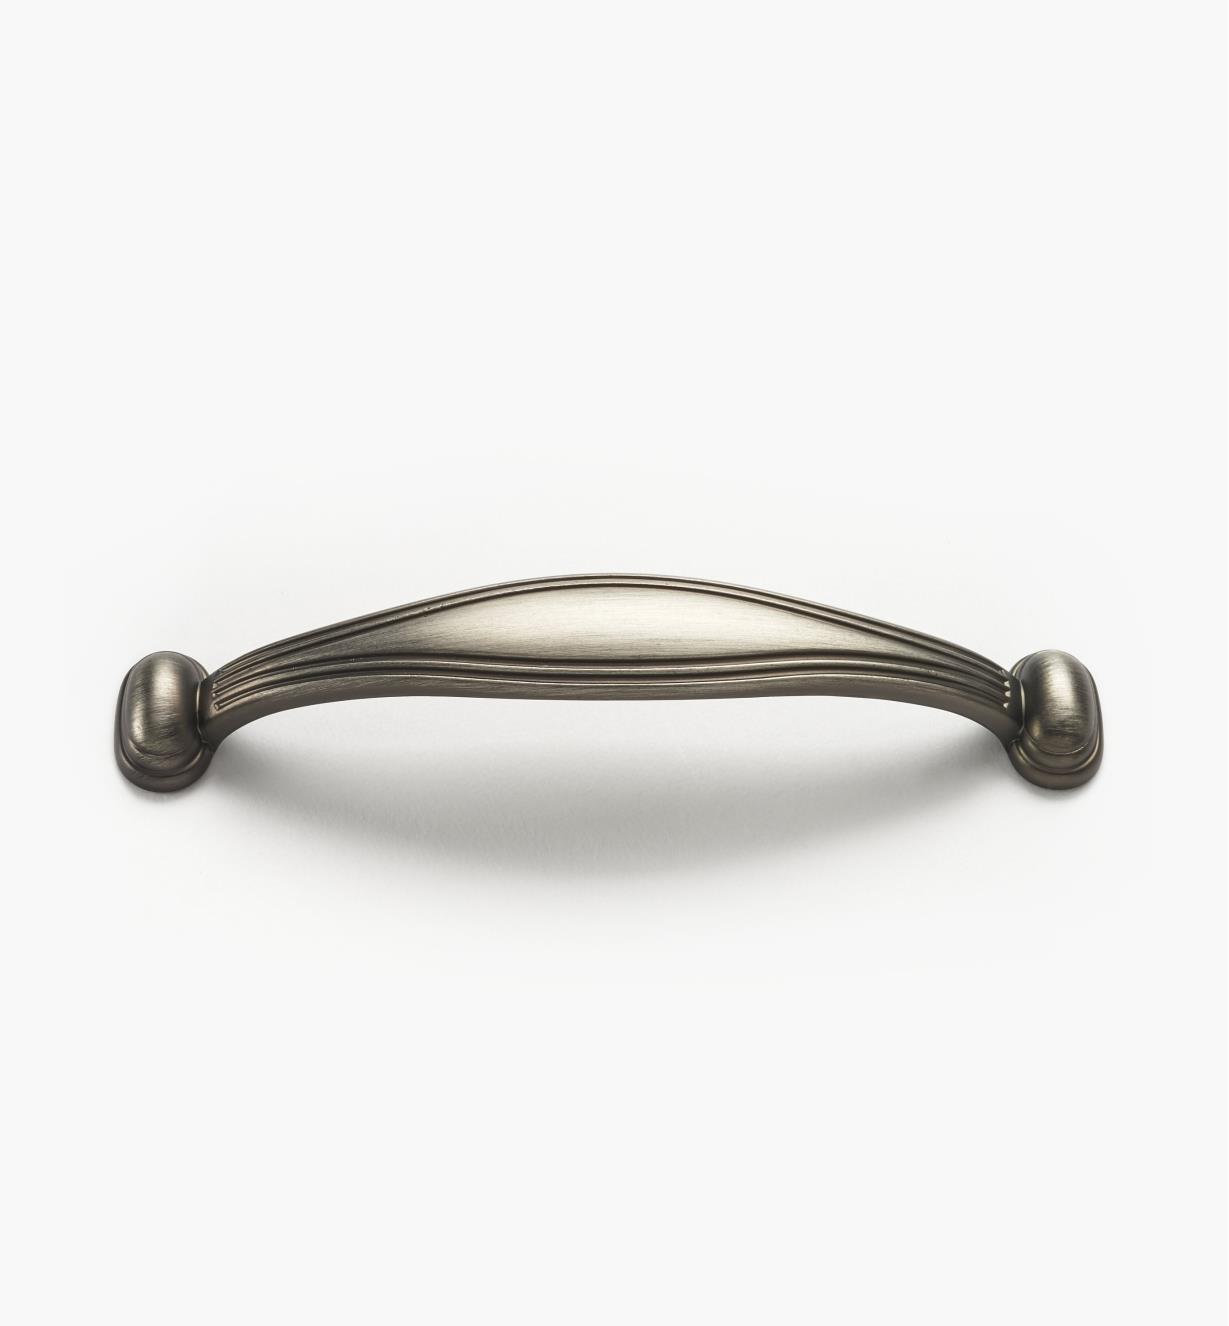 02W4136 - Brushed Antique Pewter Handle